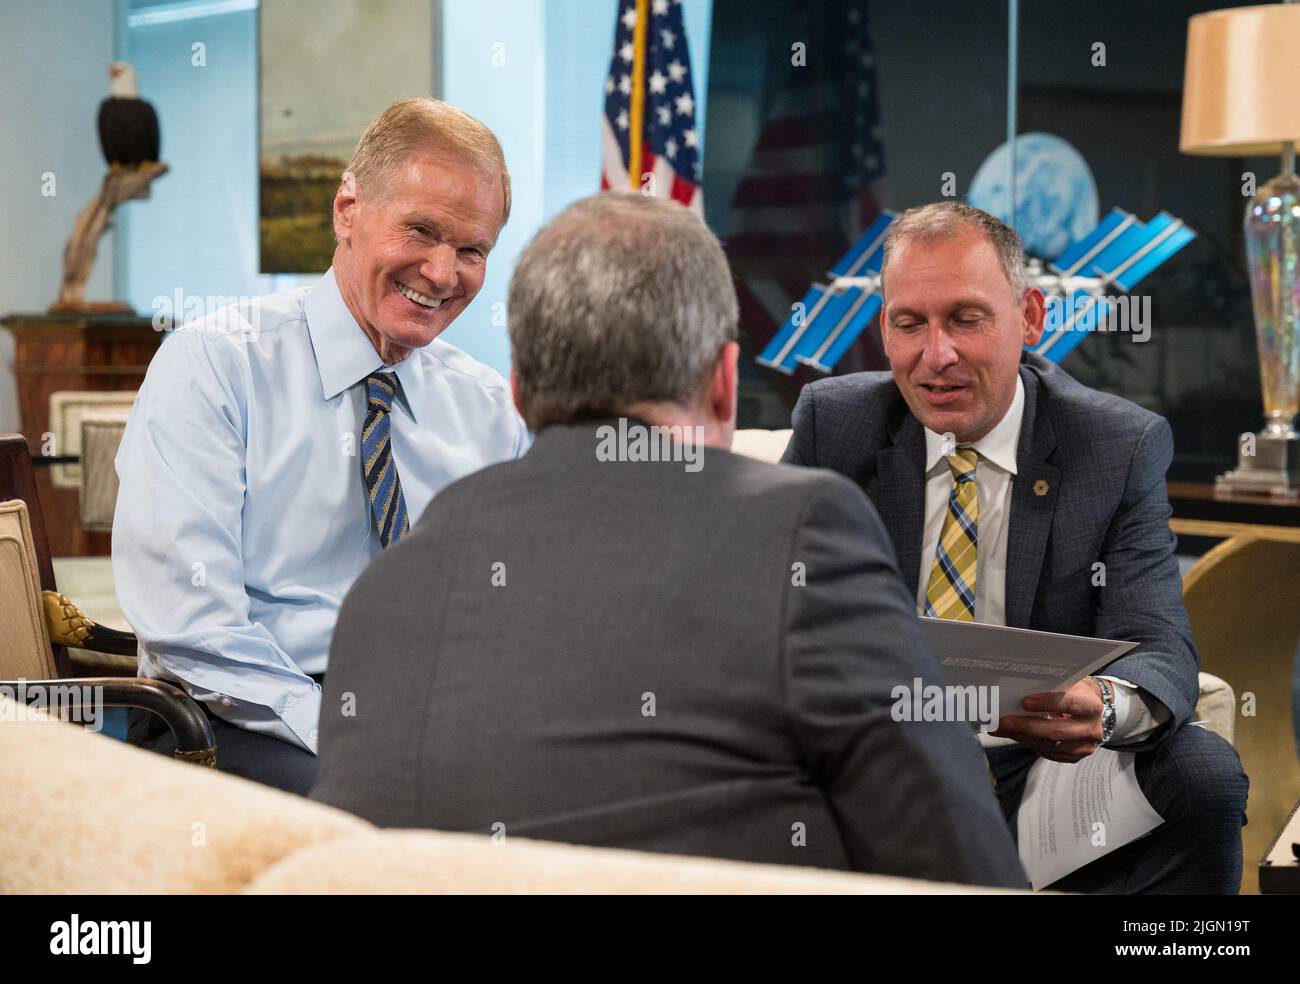 NASA Administrator Bill Nelson, left, and Associate Administrator for NASA’s Science Mission Directorate, Thomas Zurbuchen, right, speak with Webb project scientist at the Space Telescope Science Institute, Klaus Pontoppidan, center, after being shown the first full-color images from NASA’s James Webb Space Telescope in a preview meeting, Monday, July 11, 2022, at the Mary W. Jackson NASA Headquarters building in Washington. The first images and spectroscopic data from the world’s largest and most powerful space telescope, set to be released July 11 and 12, will demonstrate Webb at its full po Stock Photo